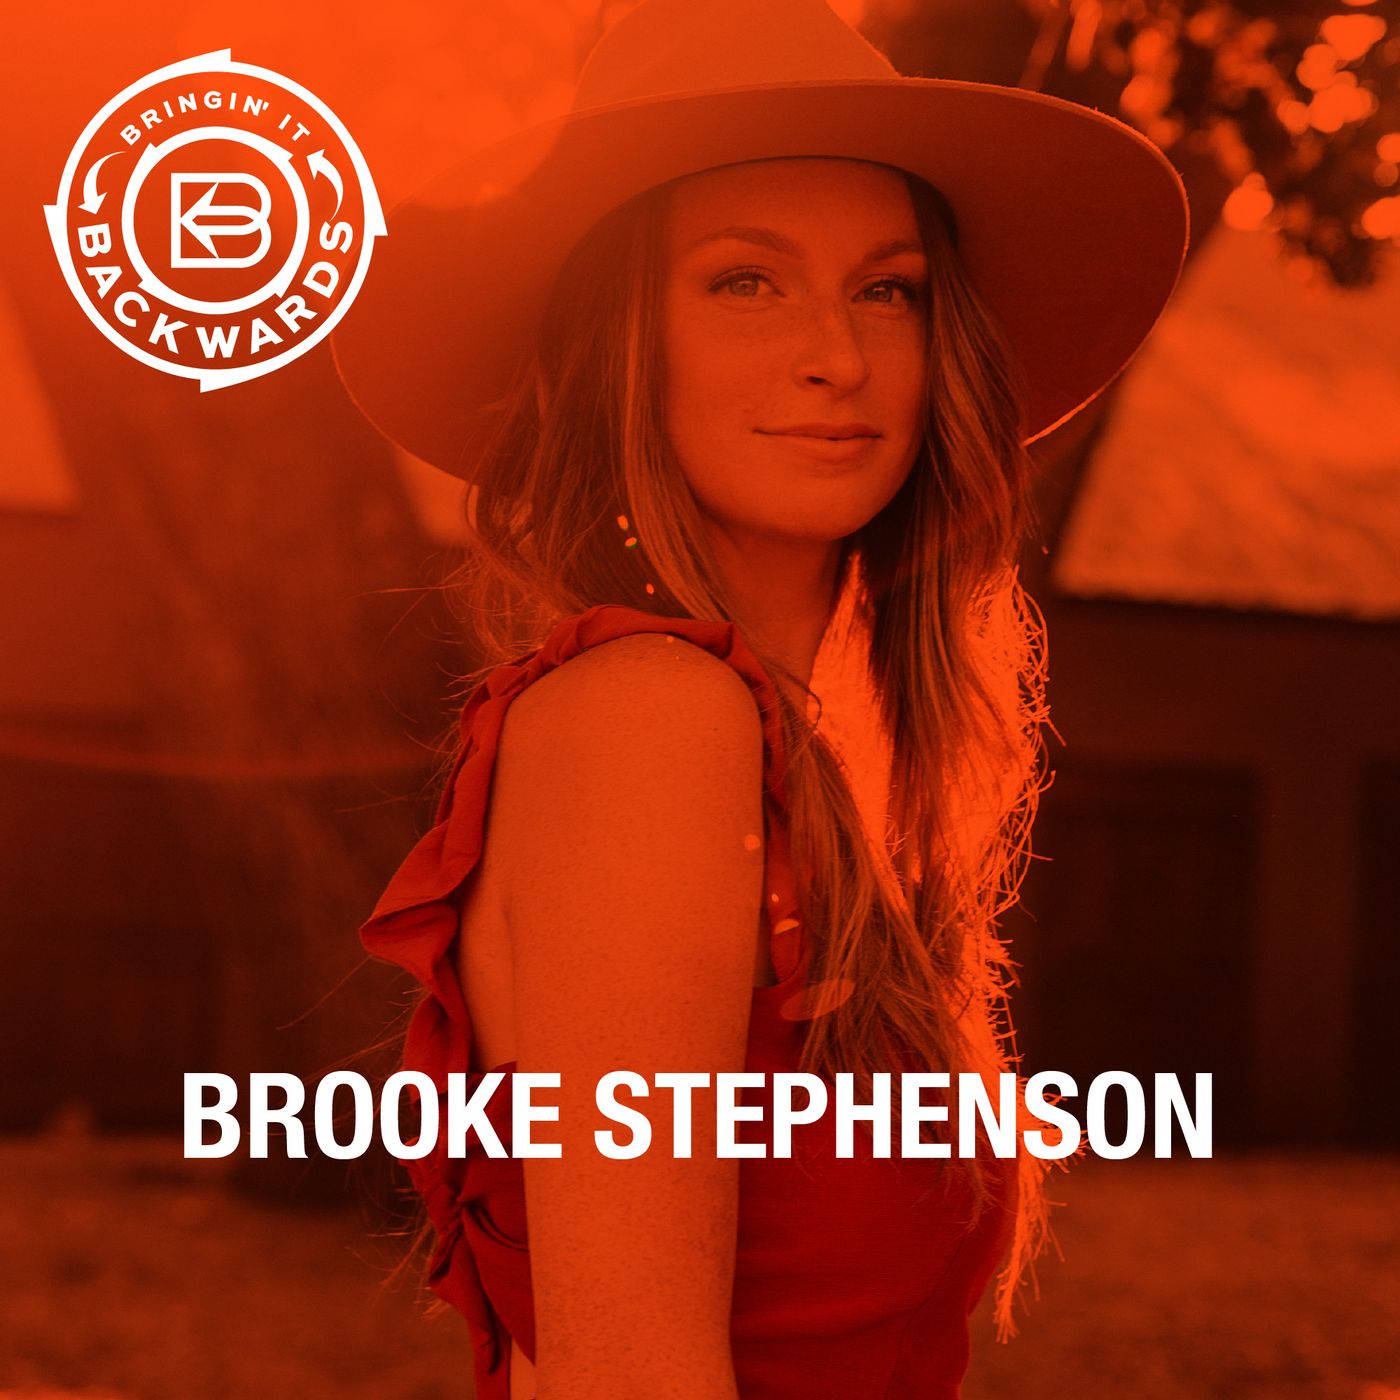 Interview with Brooke Stephenson Image